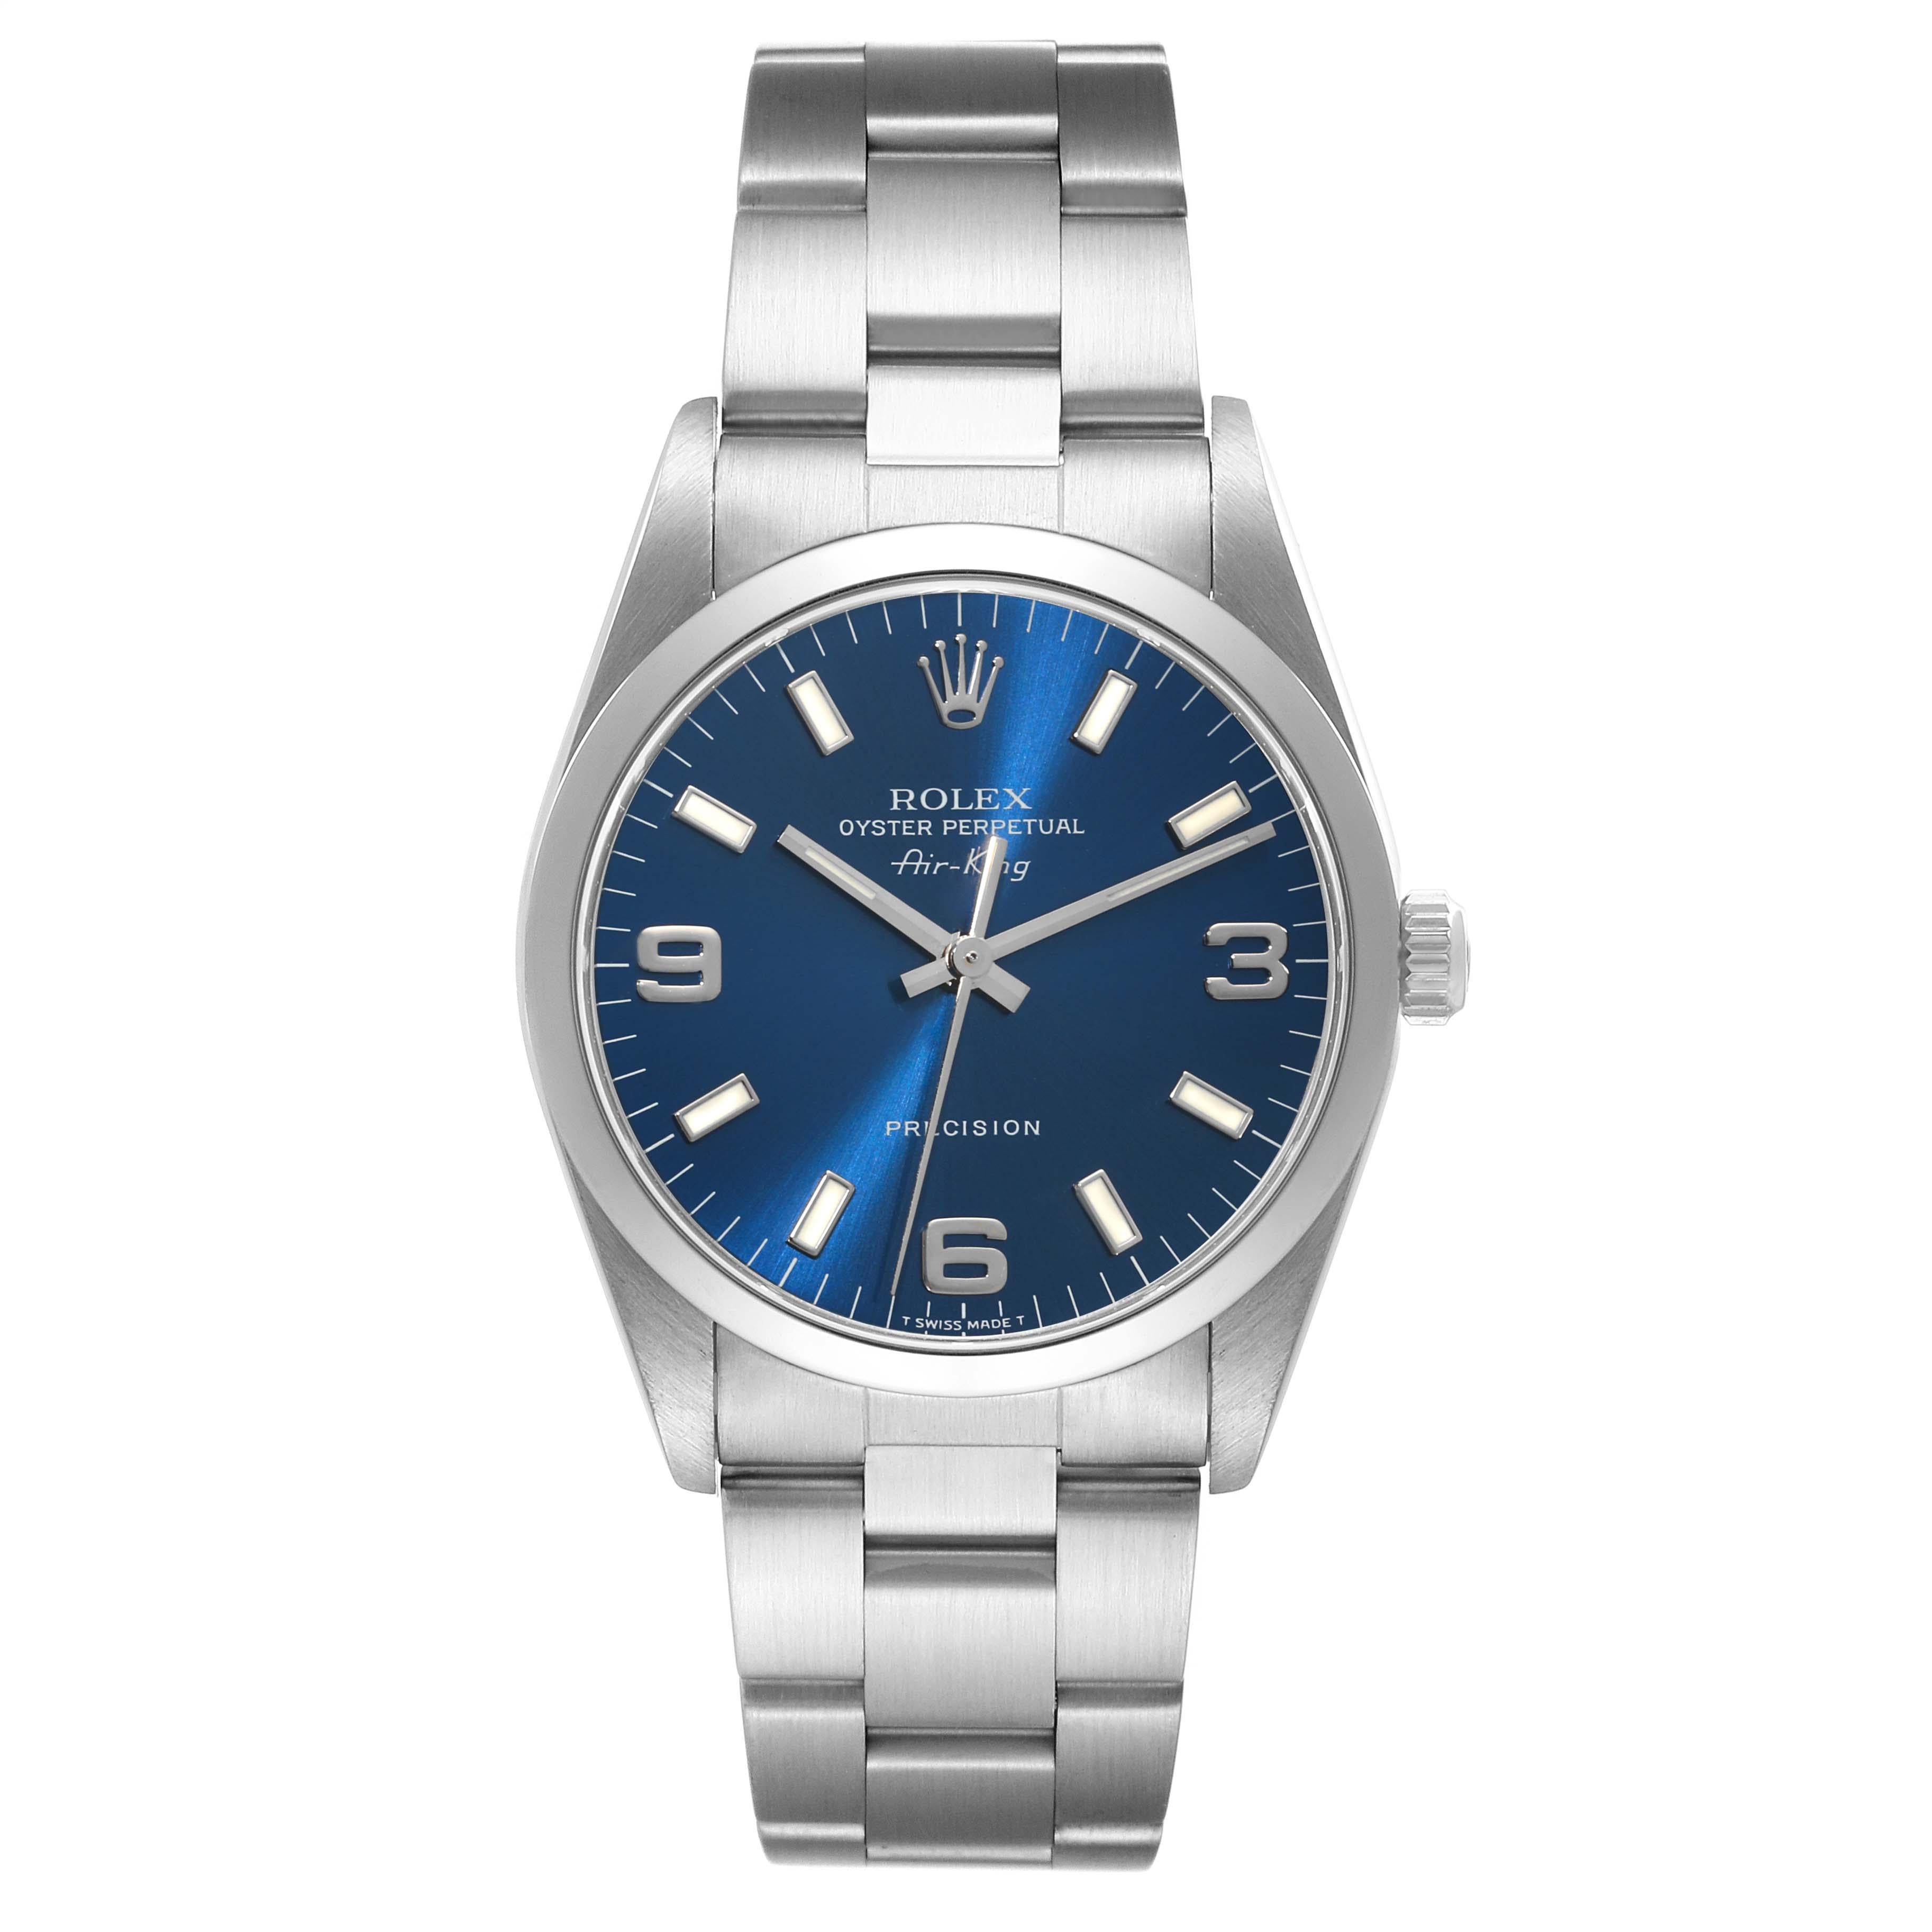 Rolex Air King 34mm Blue Dial Smooth Bezel Steel Mens Watch 14000. Automatic self-winding movement. Stainless steel case 34 mm in diameter. Rolex logo on the crown. Stainless steel smooth domed bezel. Scratch resistant sapphire crystal. Blue dial